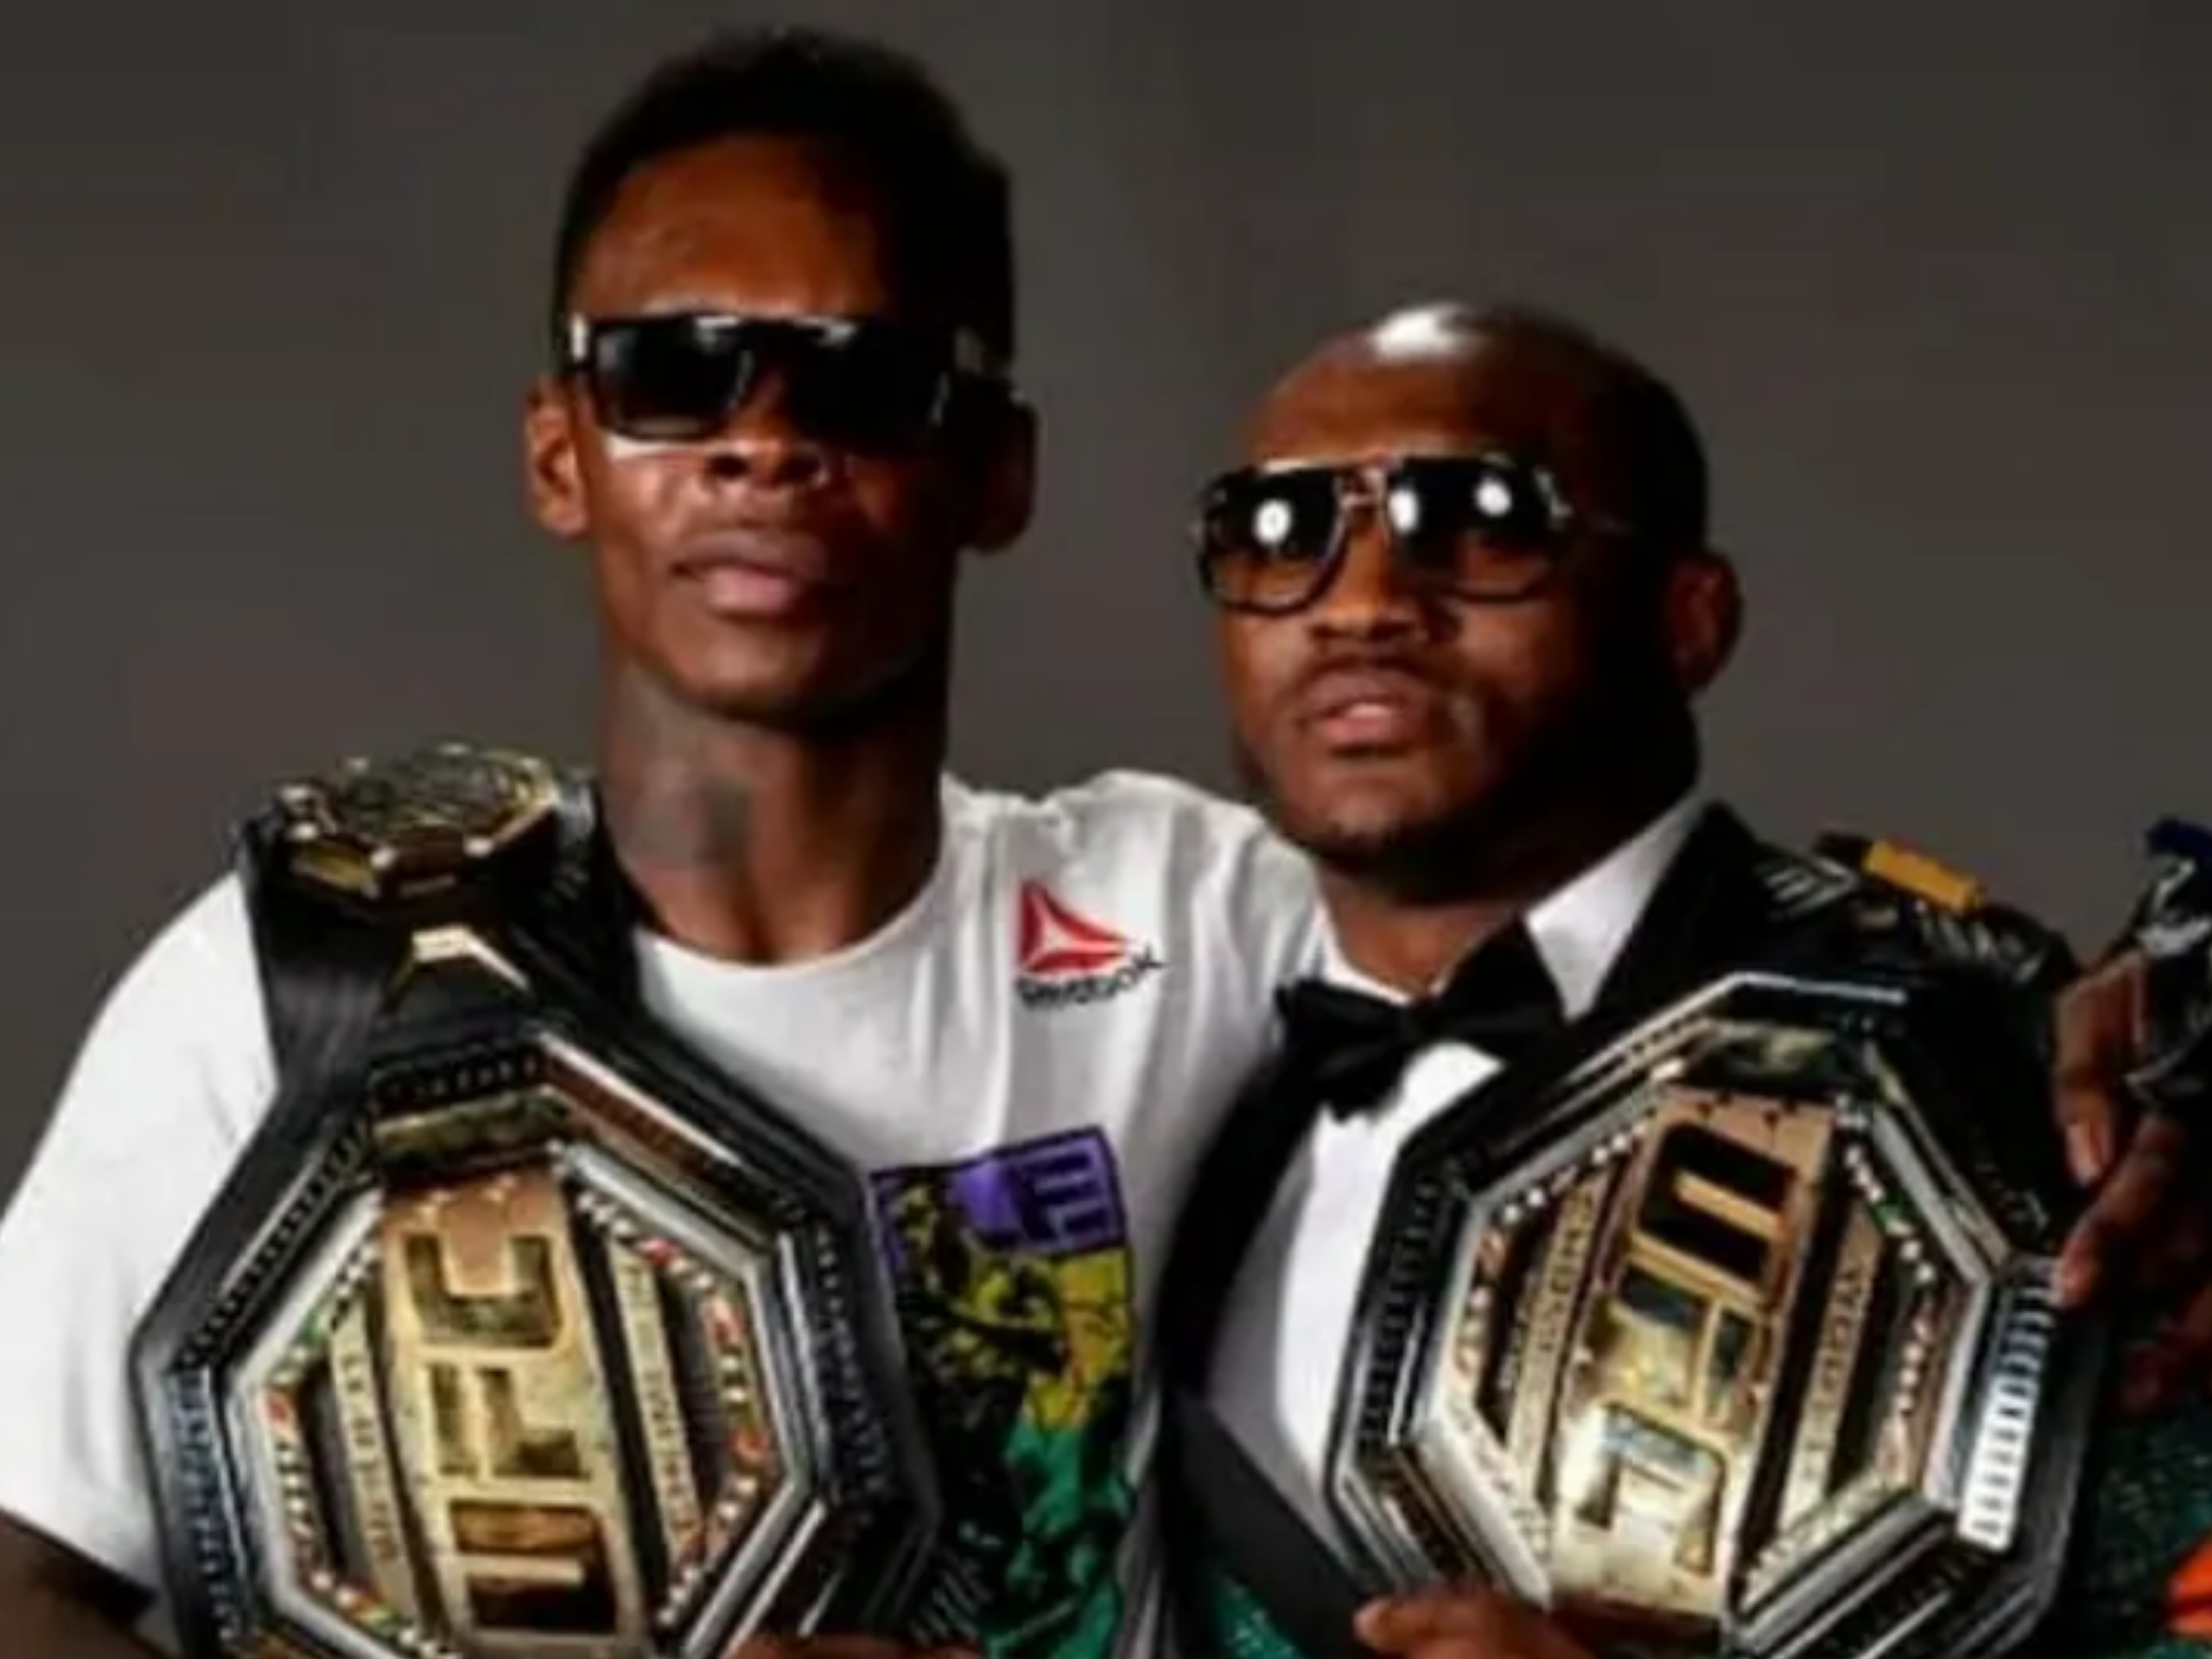 UFC Welterweight Champion Usman Speaks About Potential Fight with Compatriot Adesanya